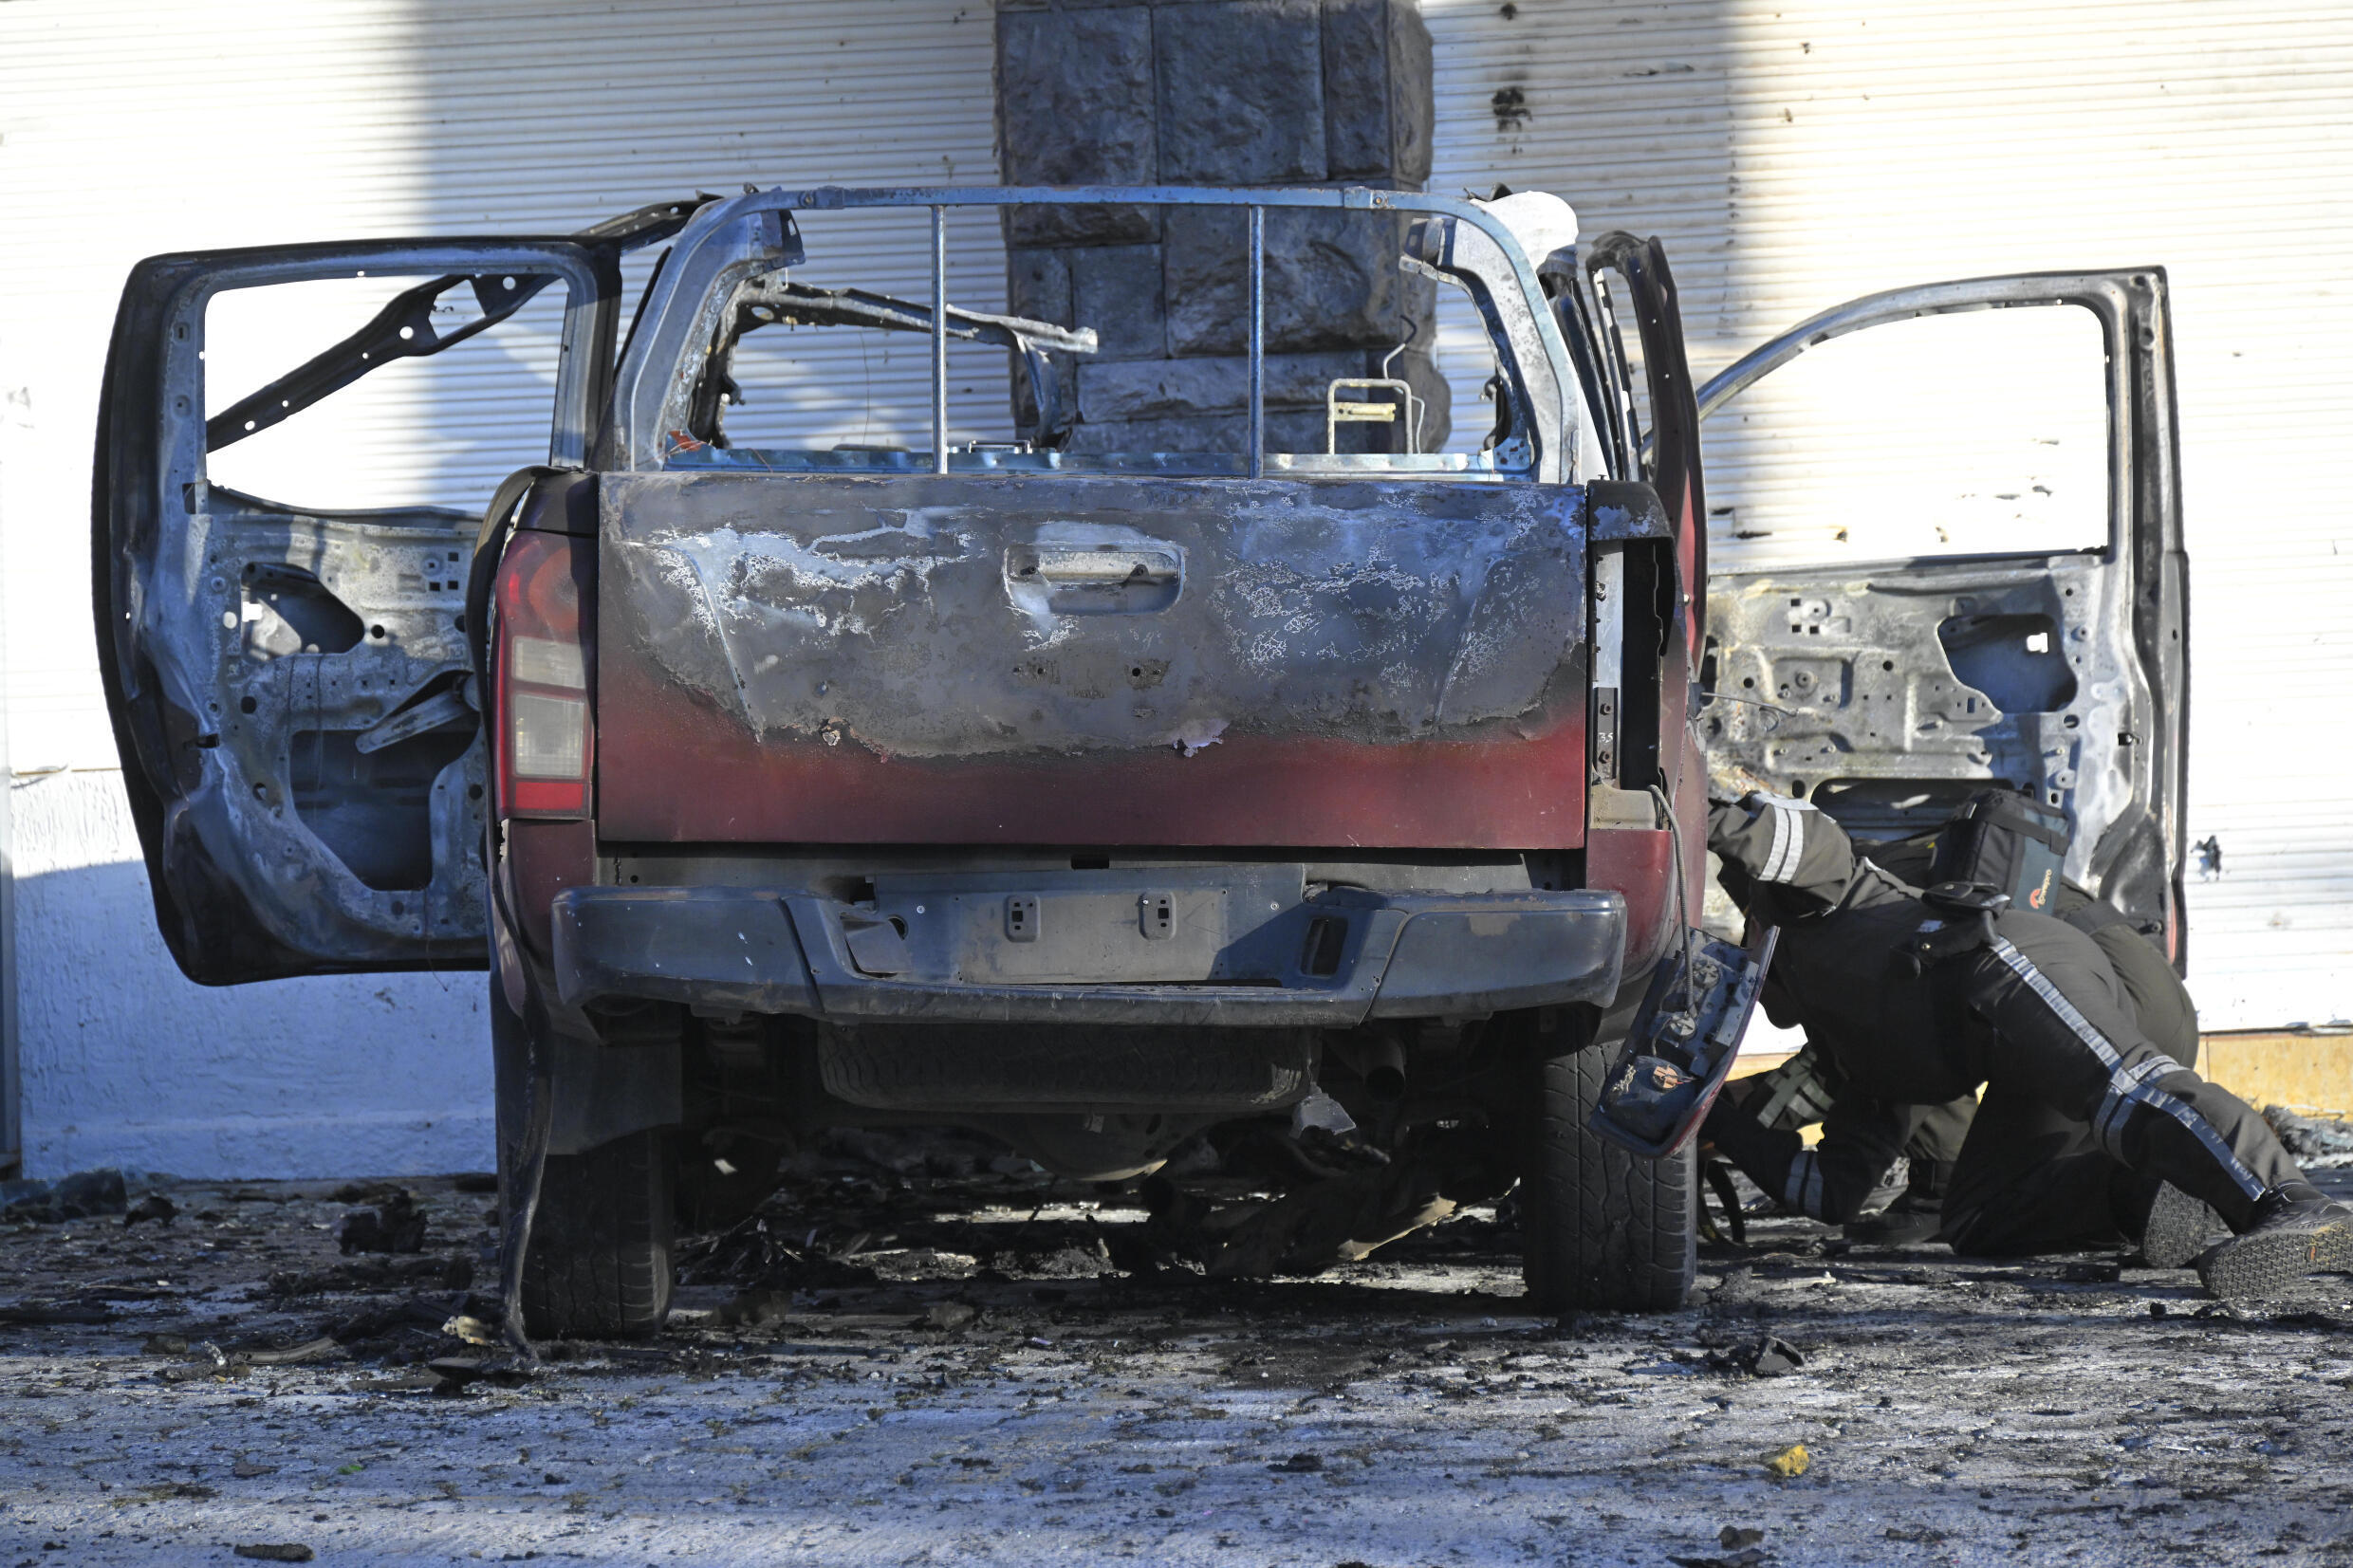 Police inspect the wreckage of a burned car in front of SNAI headquarters in Quito